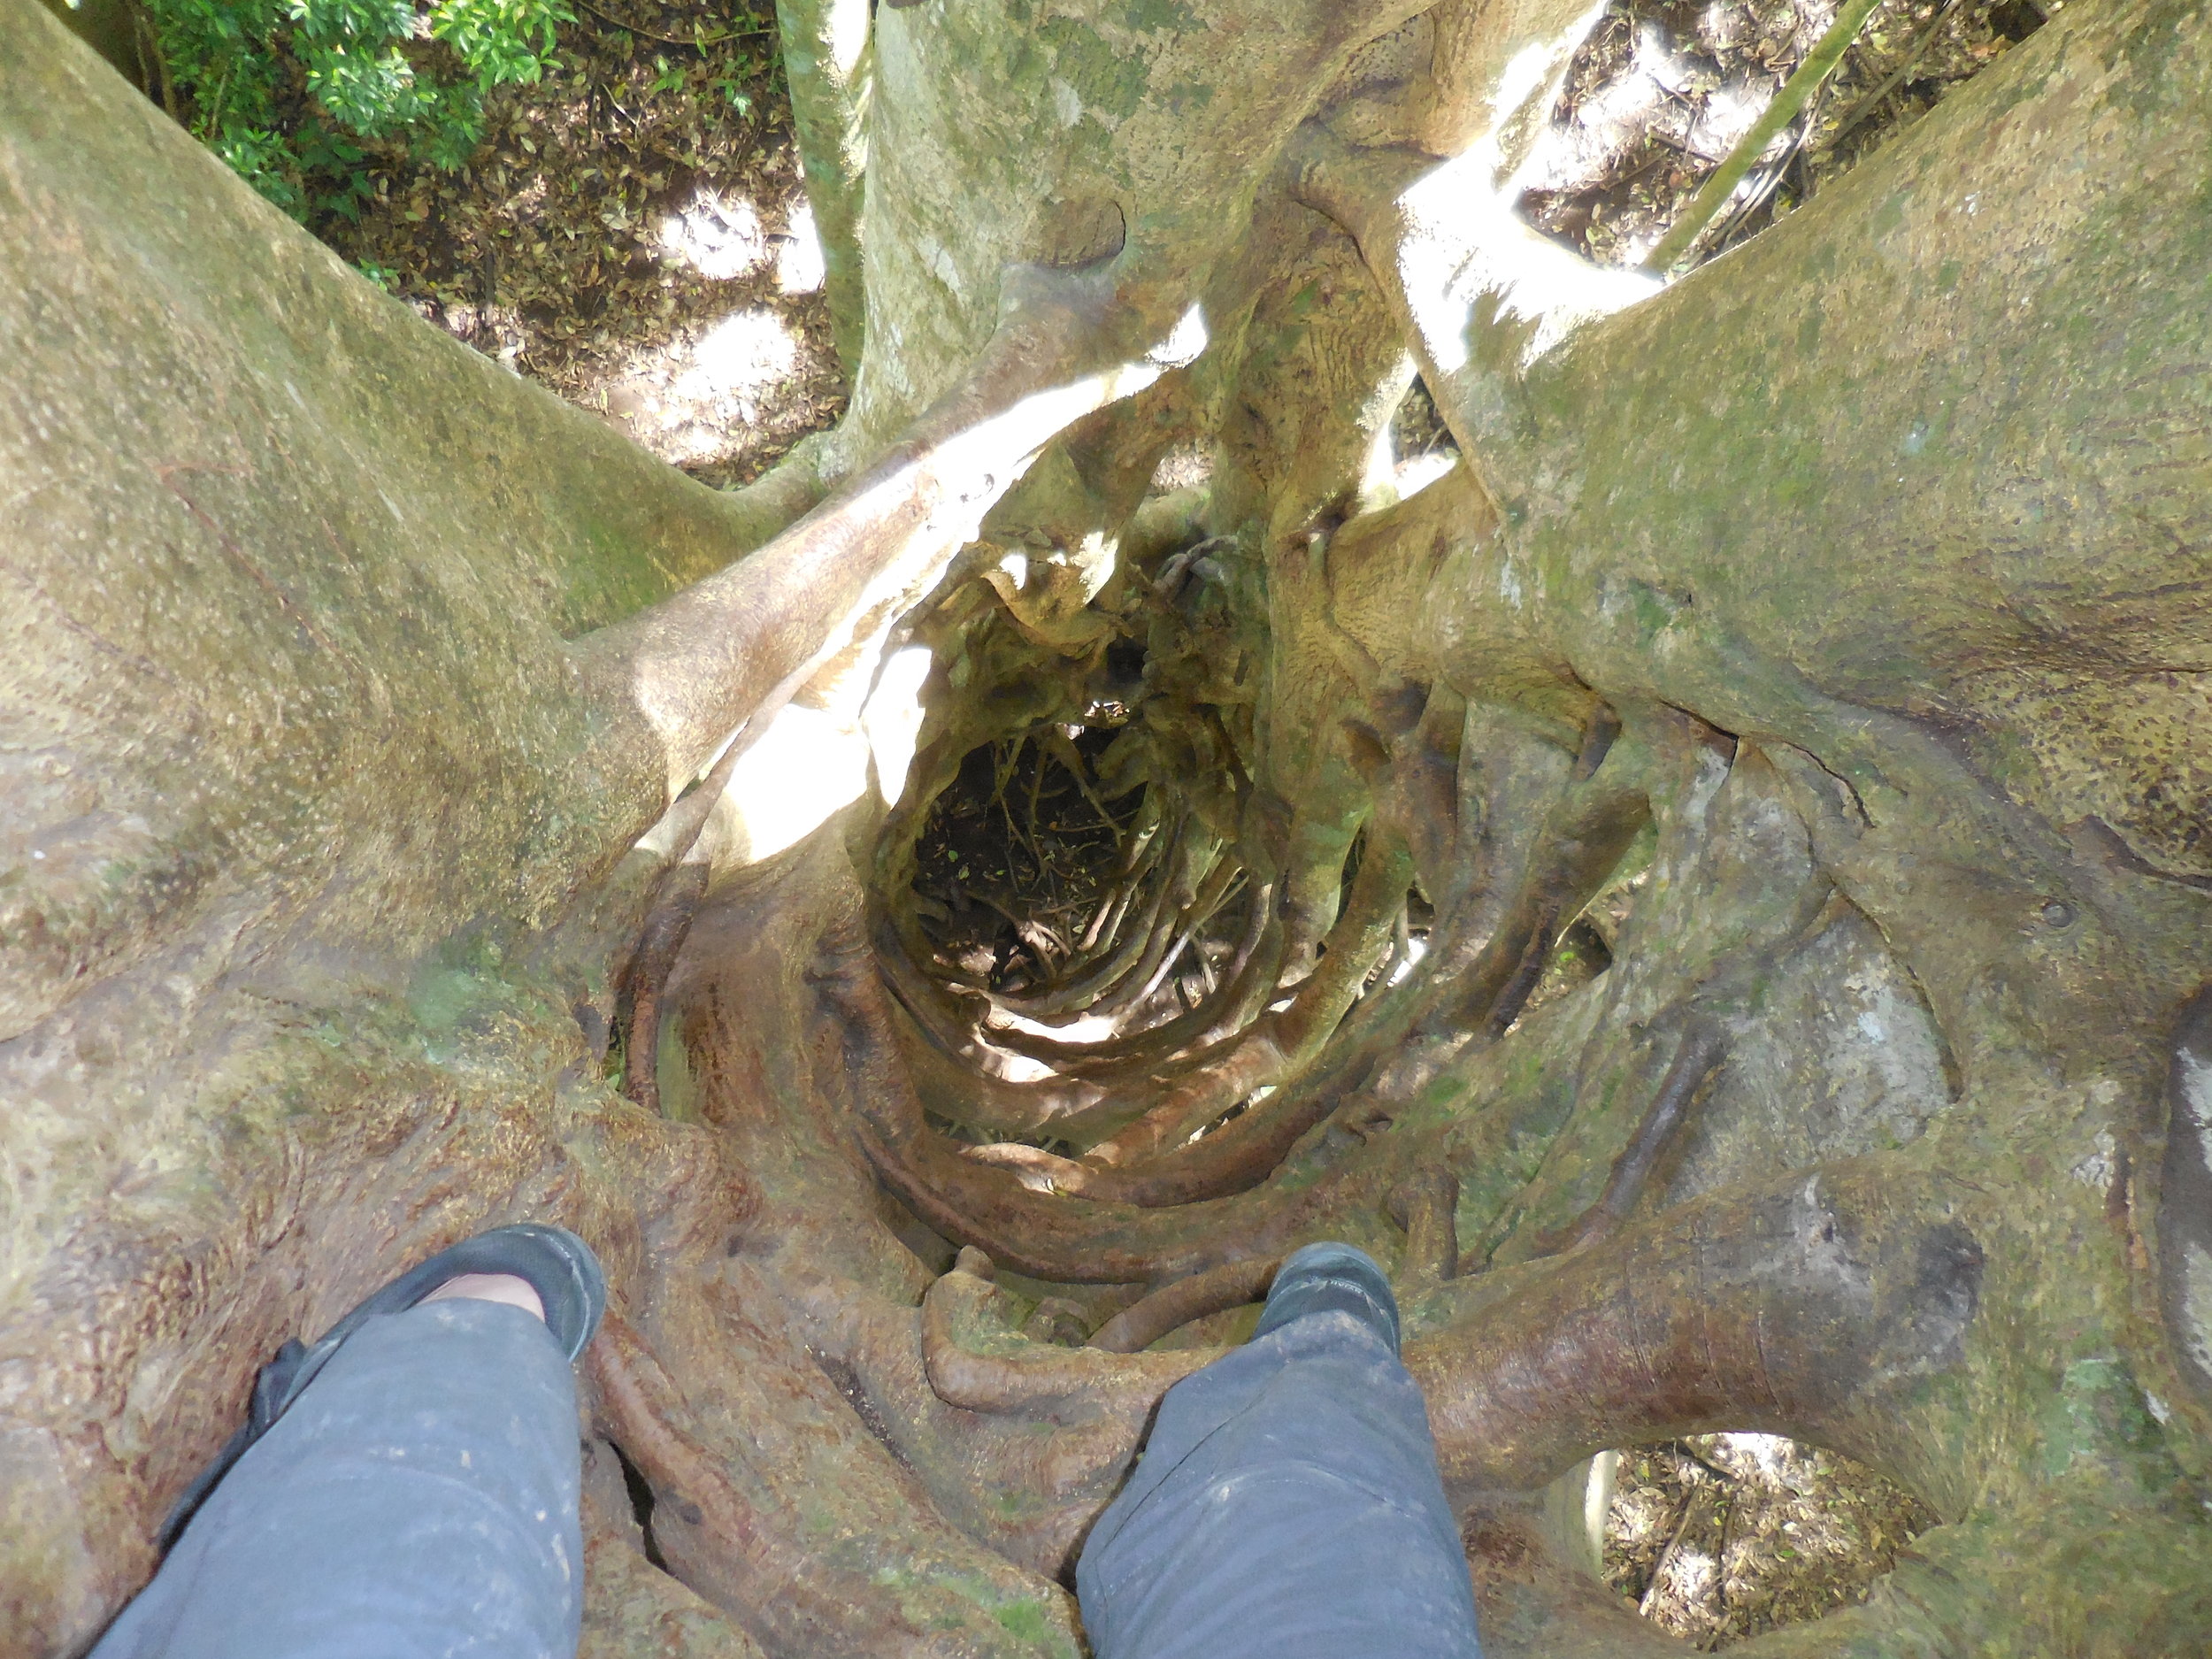 inside the hollow tree